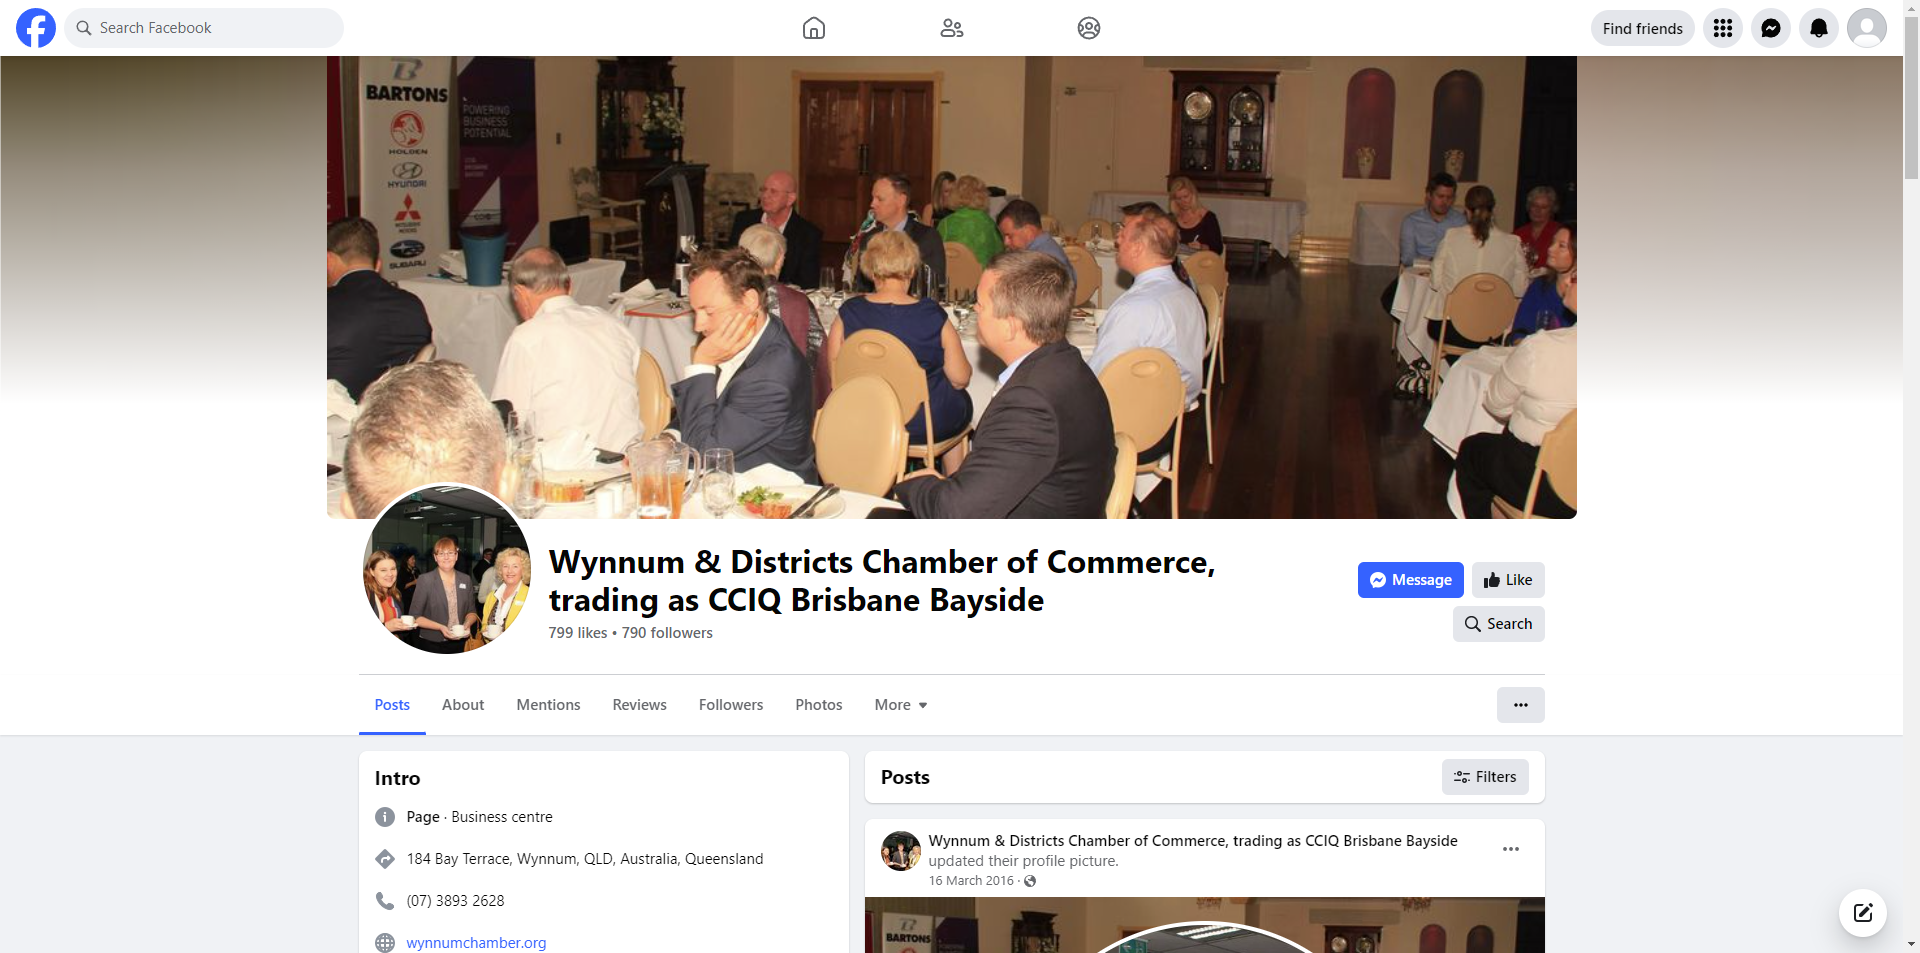 Wynnum & Districts Chamber of Commerce